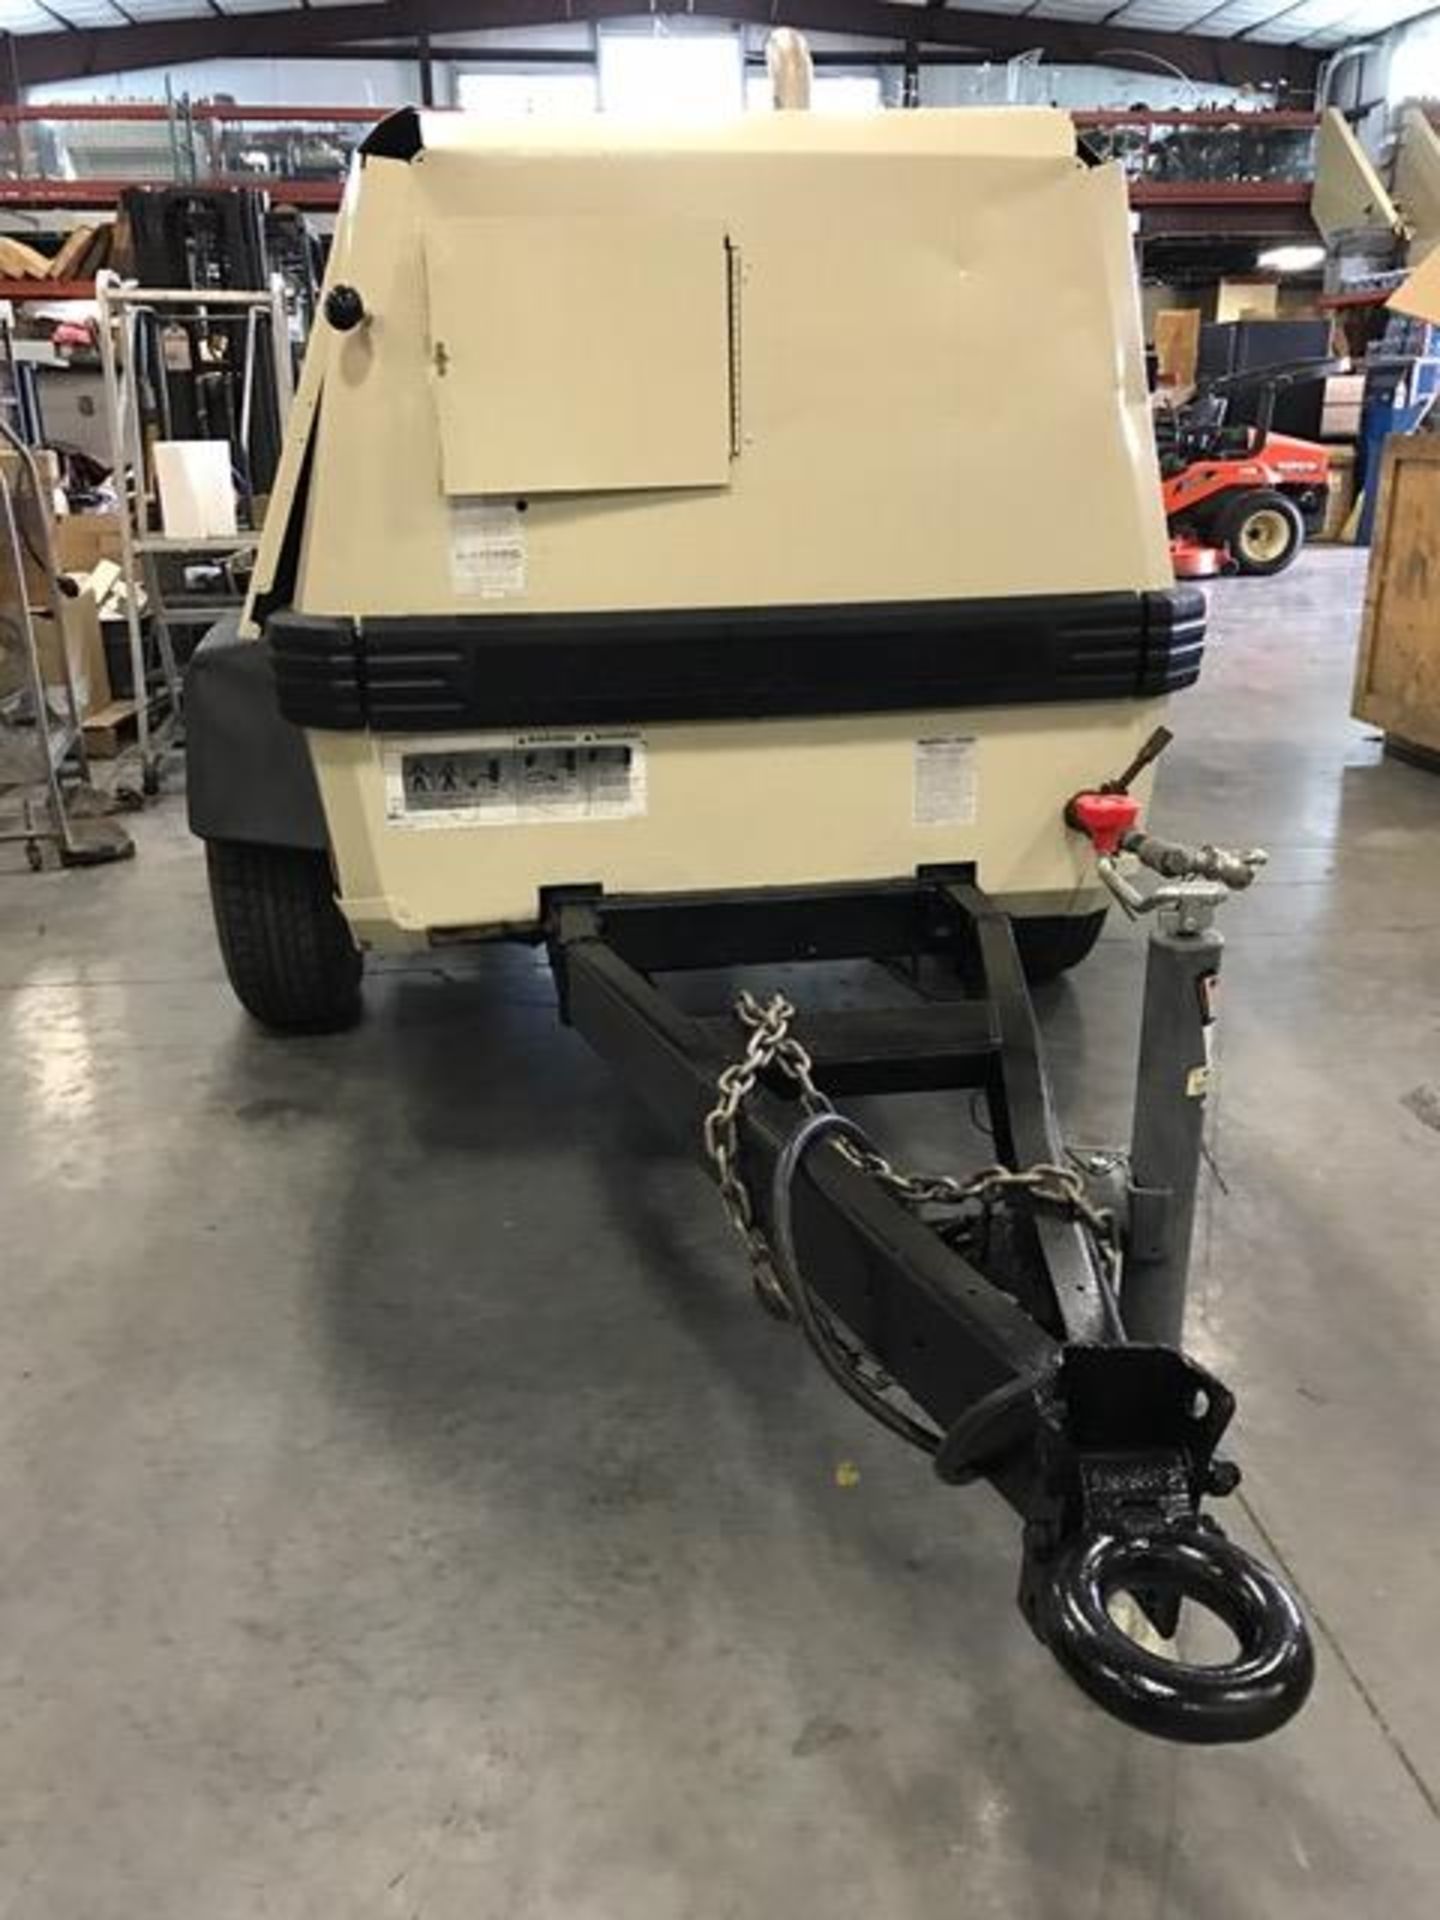 INGERSOLL RAND P185, 1,169 HOURS SHOWING, DIESEL, ADJUSTABLE PINTLE HITCH - Image 3 of 6